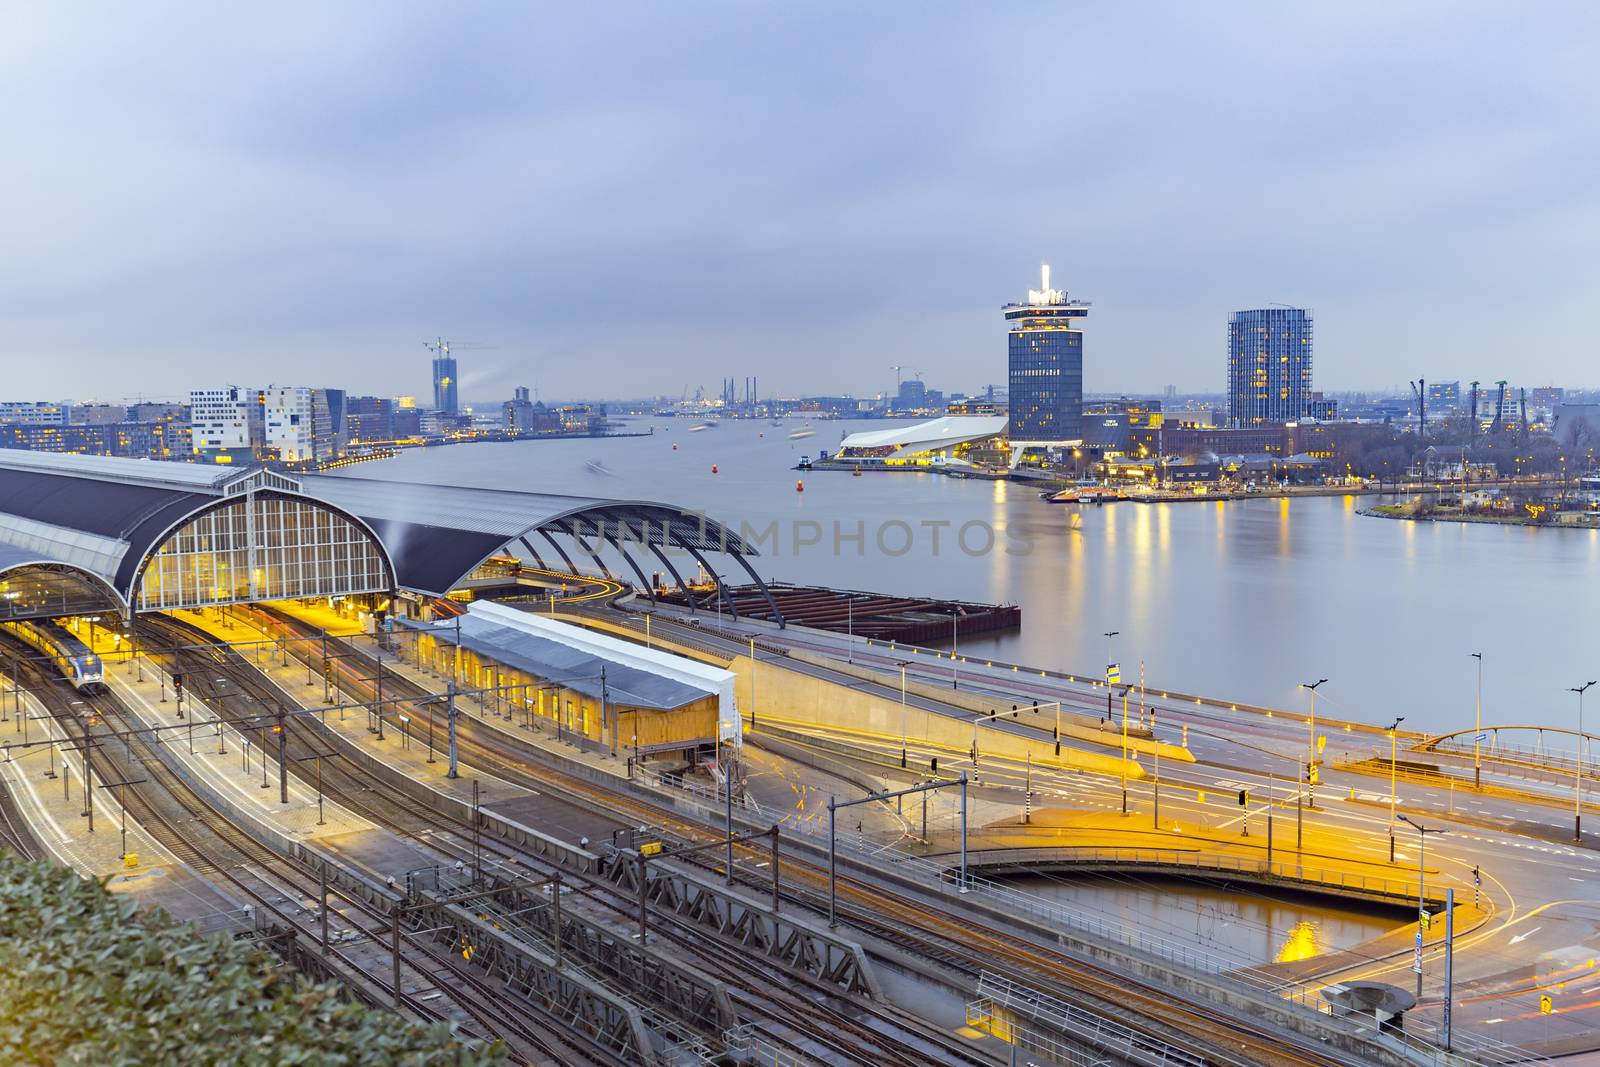 Amsterdam train station and the Amstel river at night by ankorlight